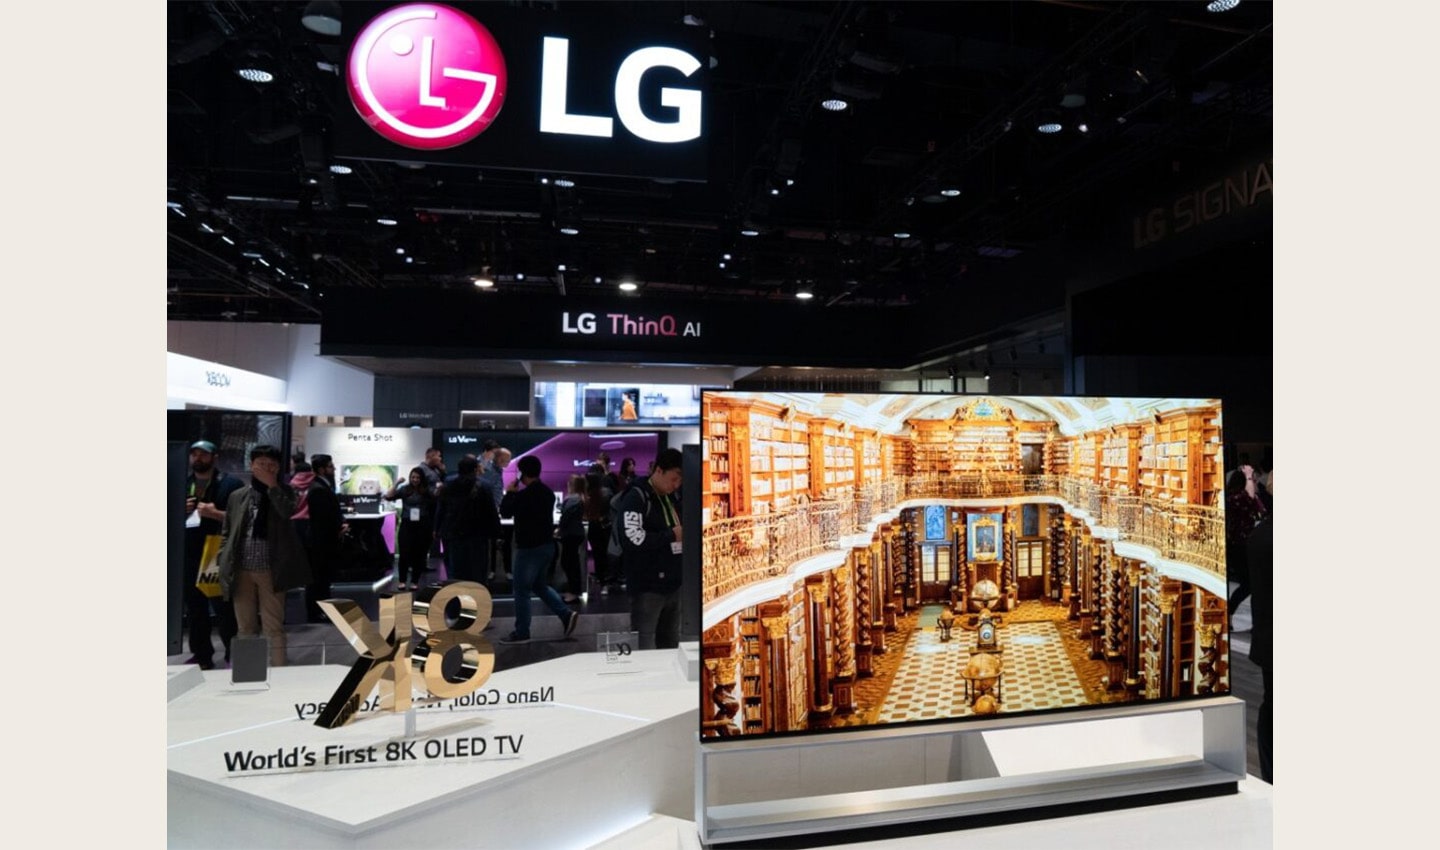 Front view of an LG 8K OLED TV set positioned on the right side of a promotional sign saying 